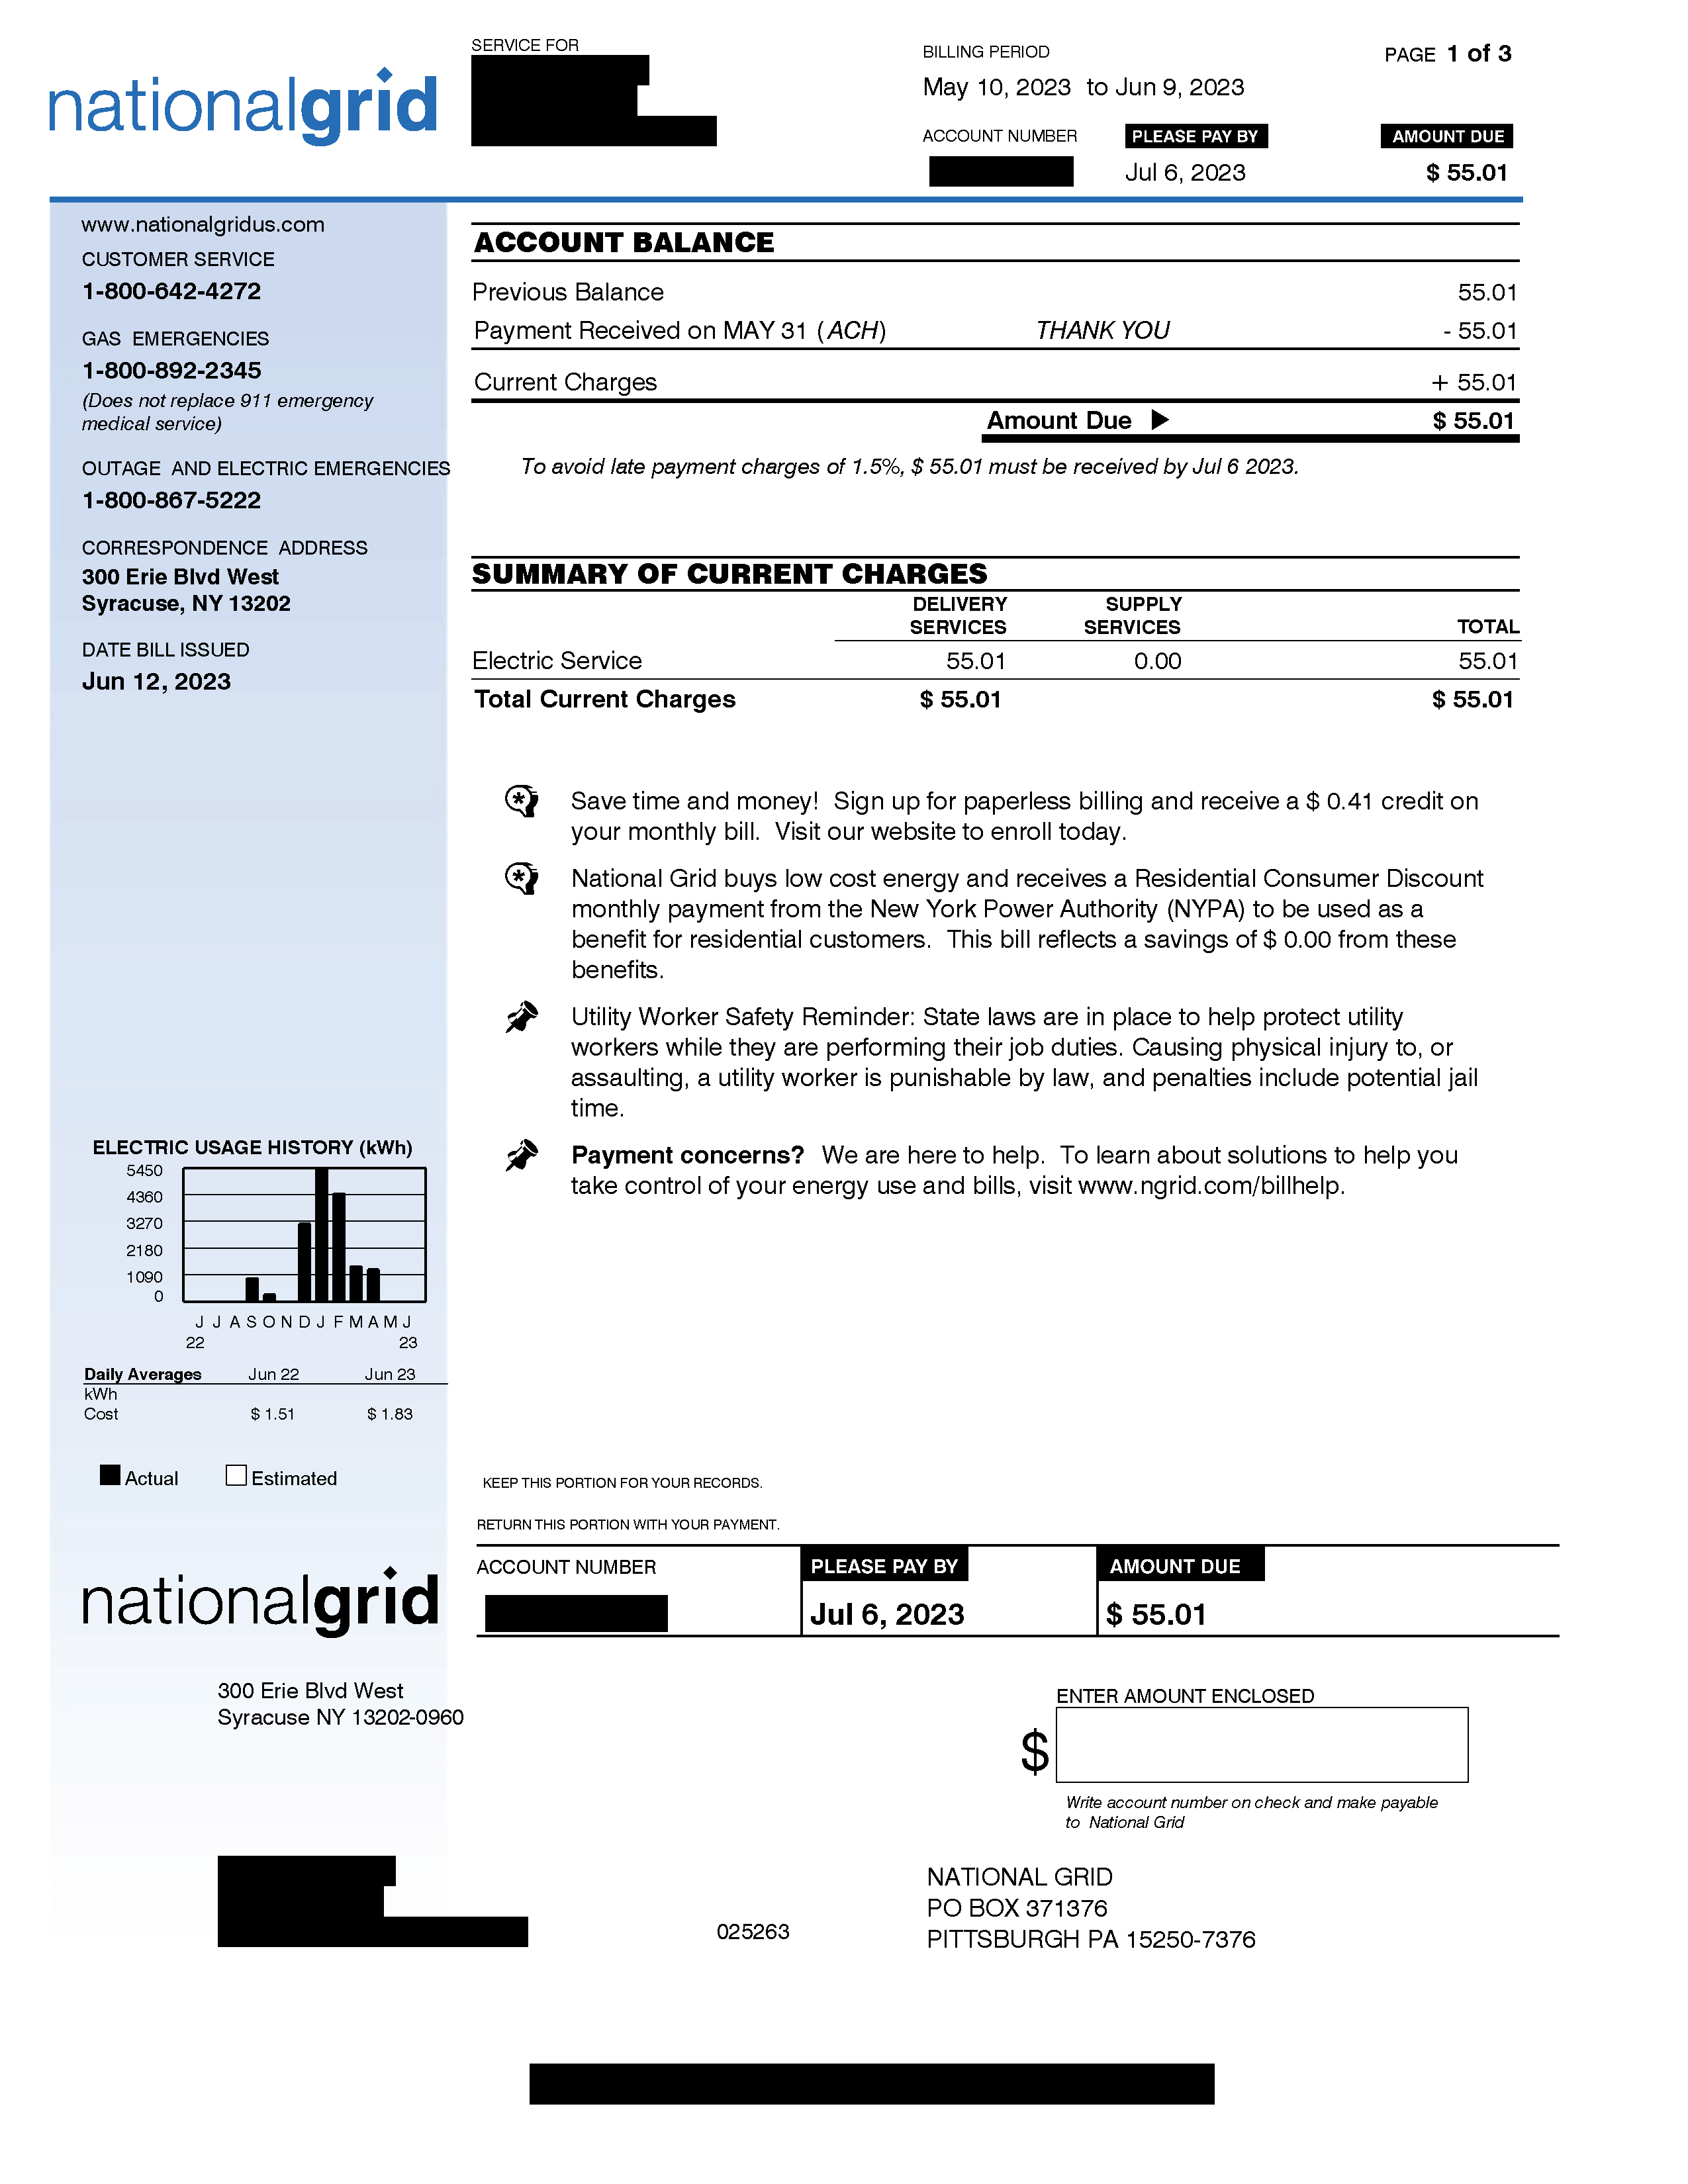 Rooftop Solar Bill - Page 1